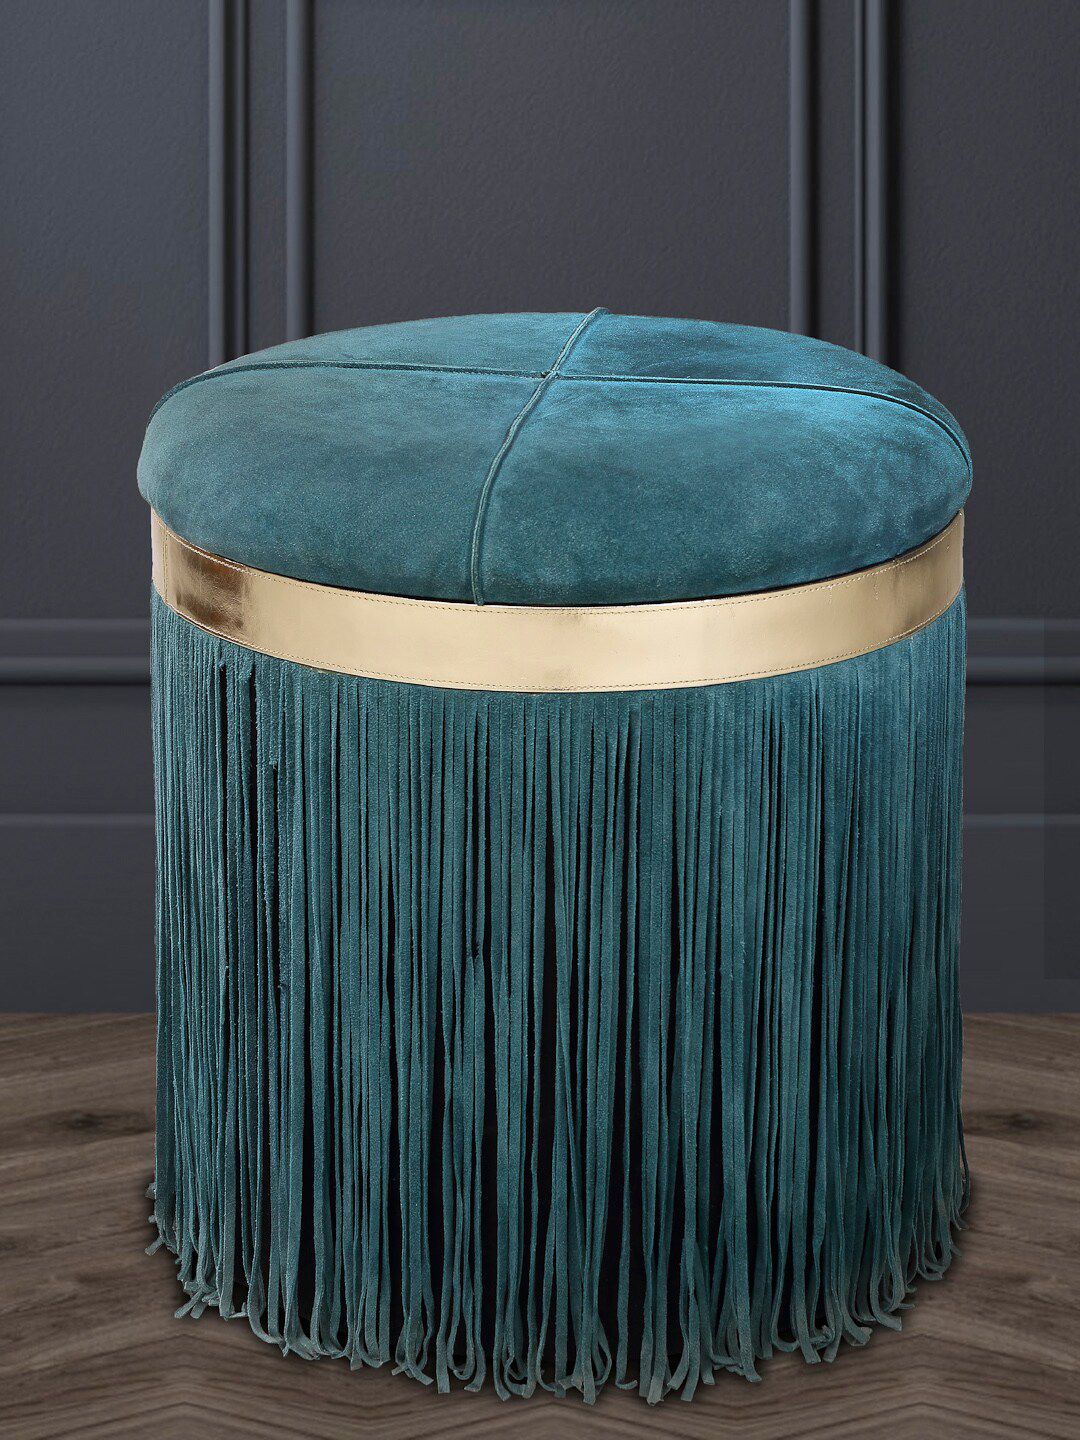 IMUR Green Colour Pouffes Cushions Price in India